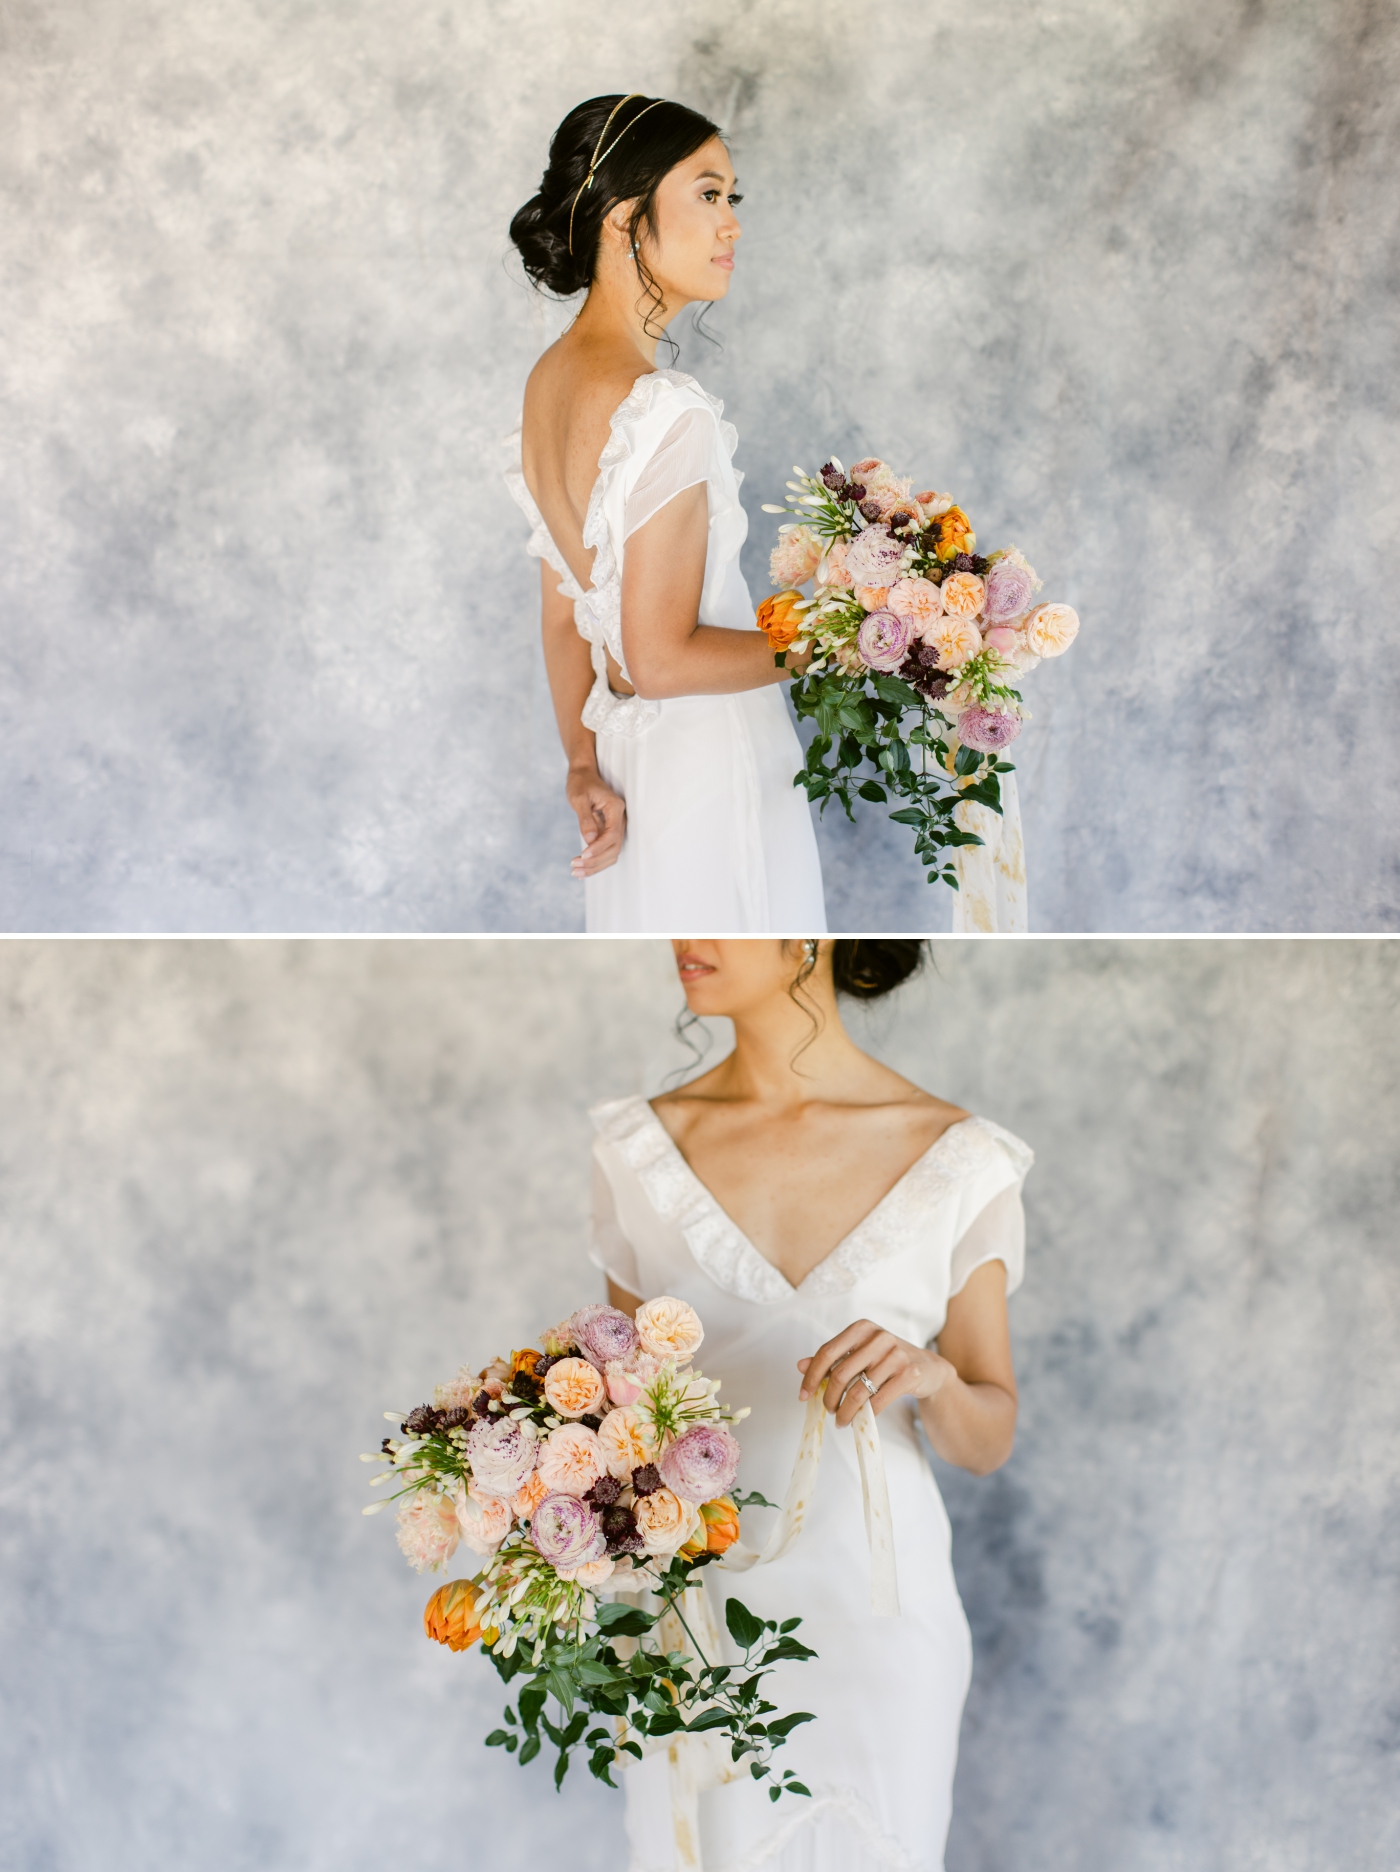 romantic bridal bouquet by Tulip and Tiwg